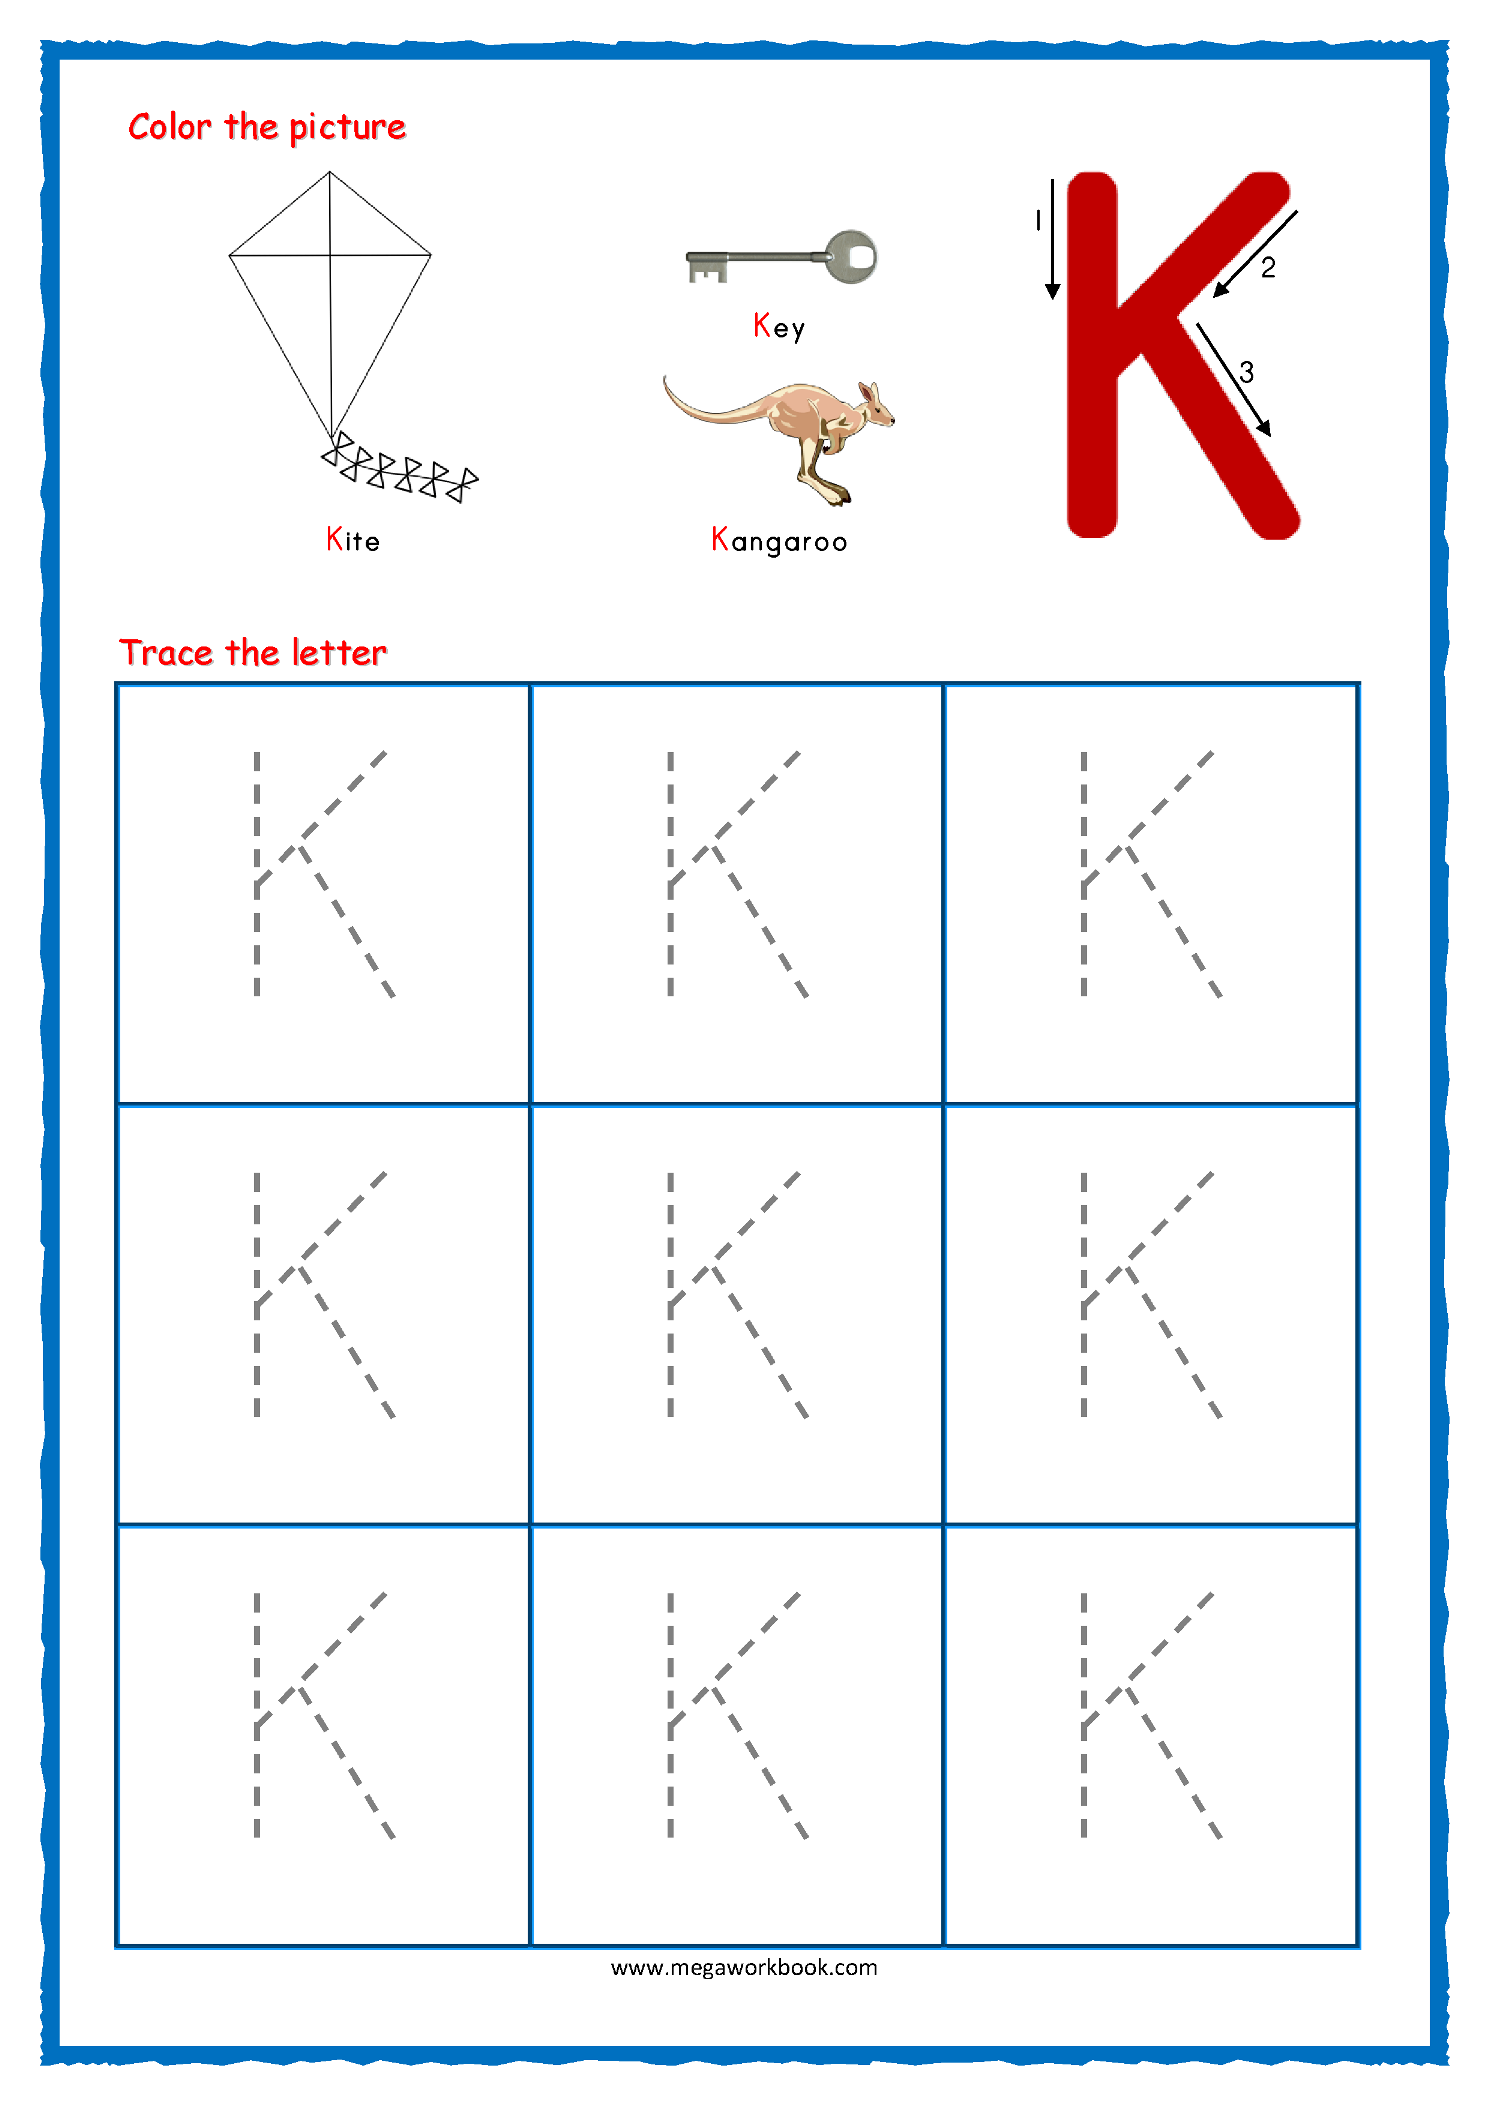 tracing-letters-alphabet-tracing-capital-letters-letter-tracing-worksheets-free